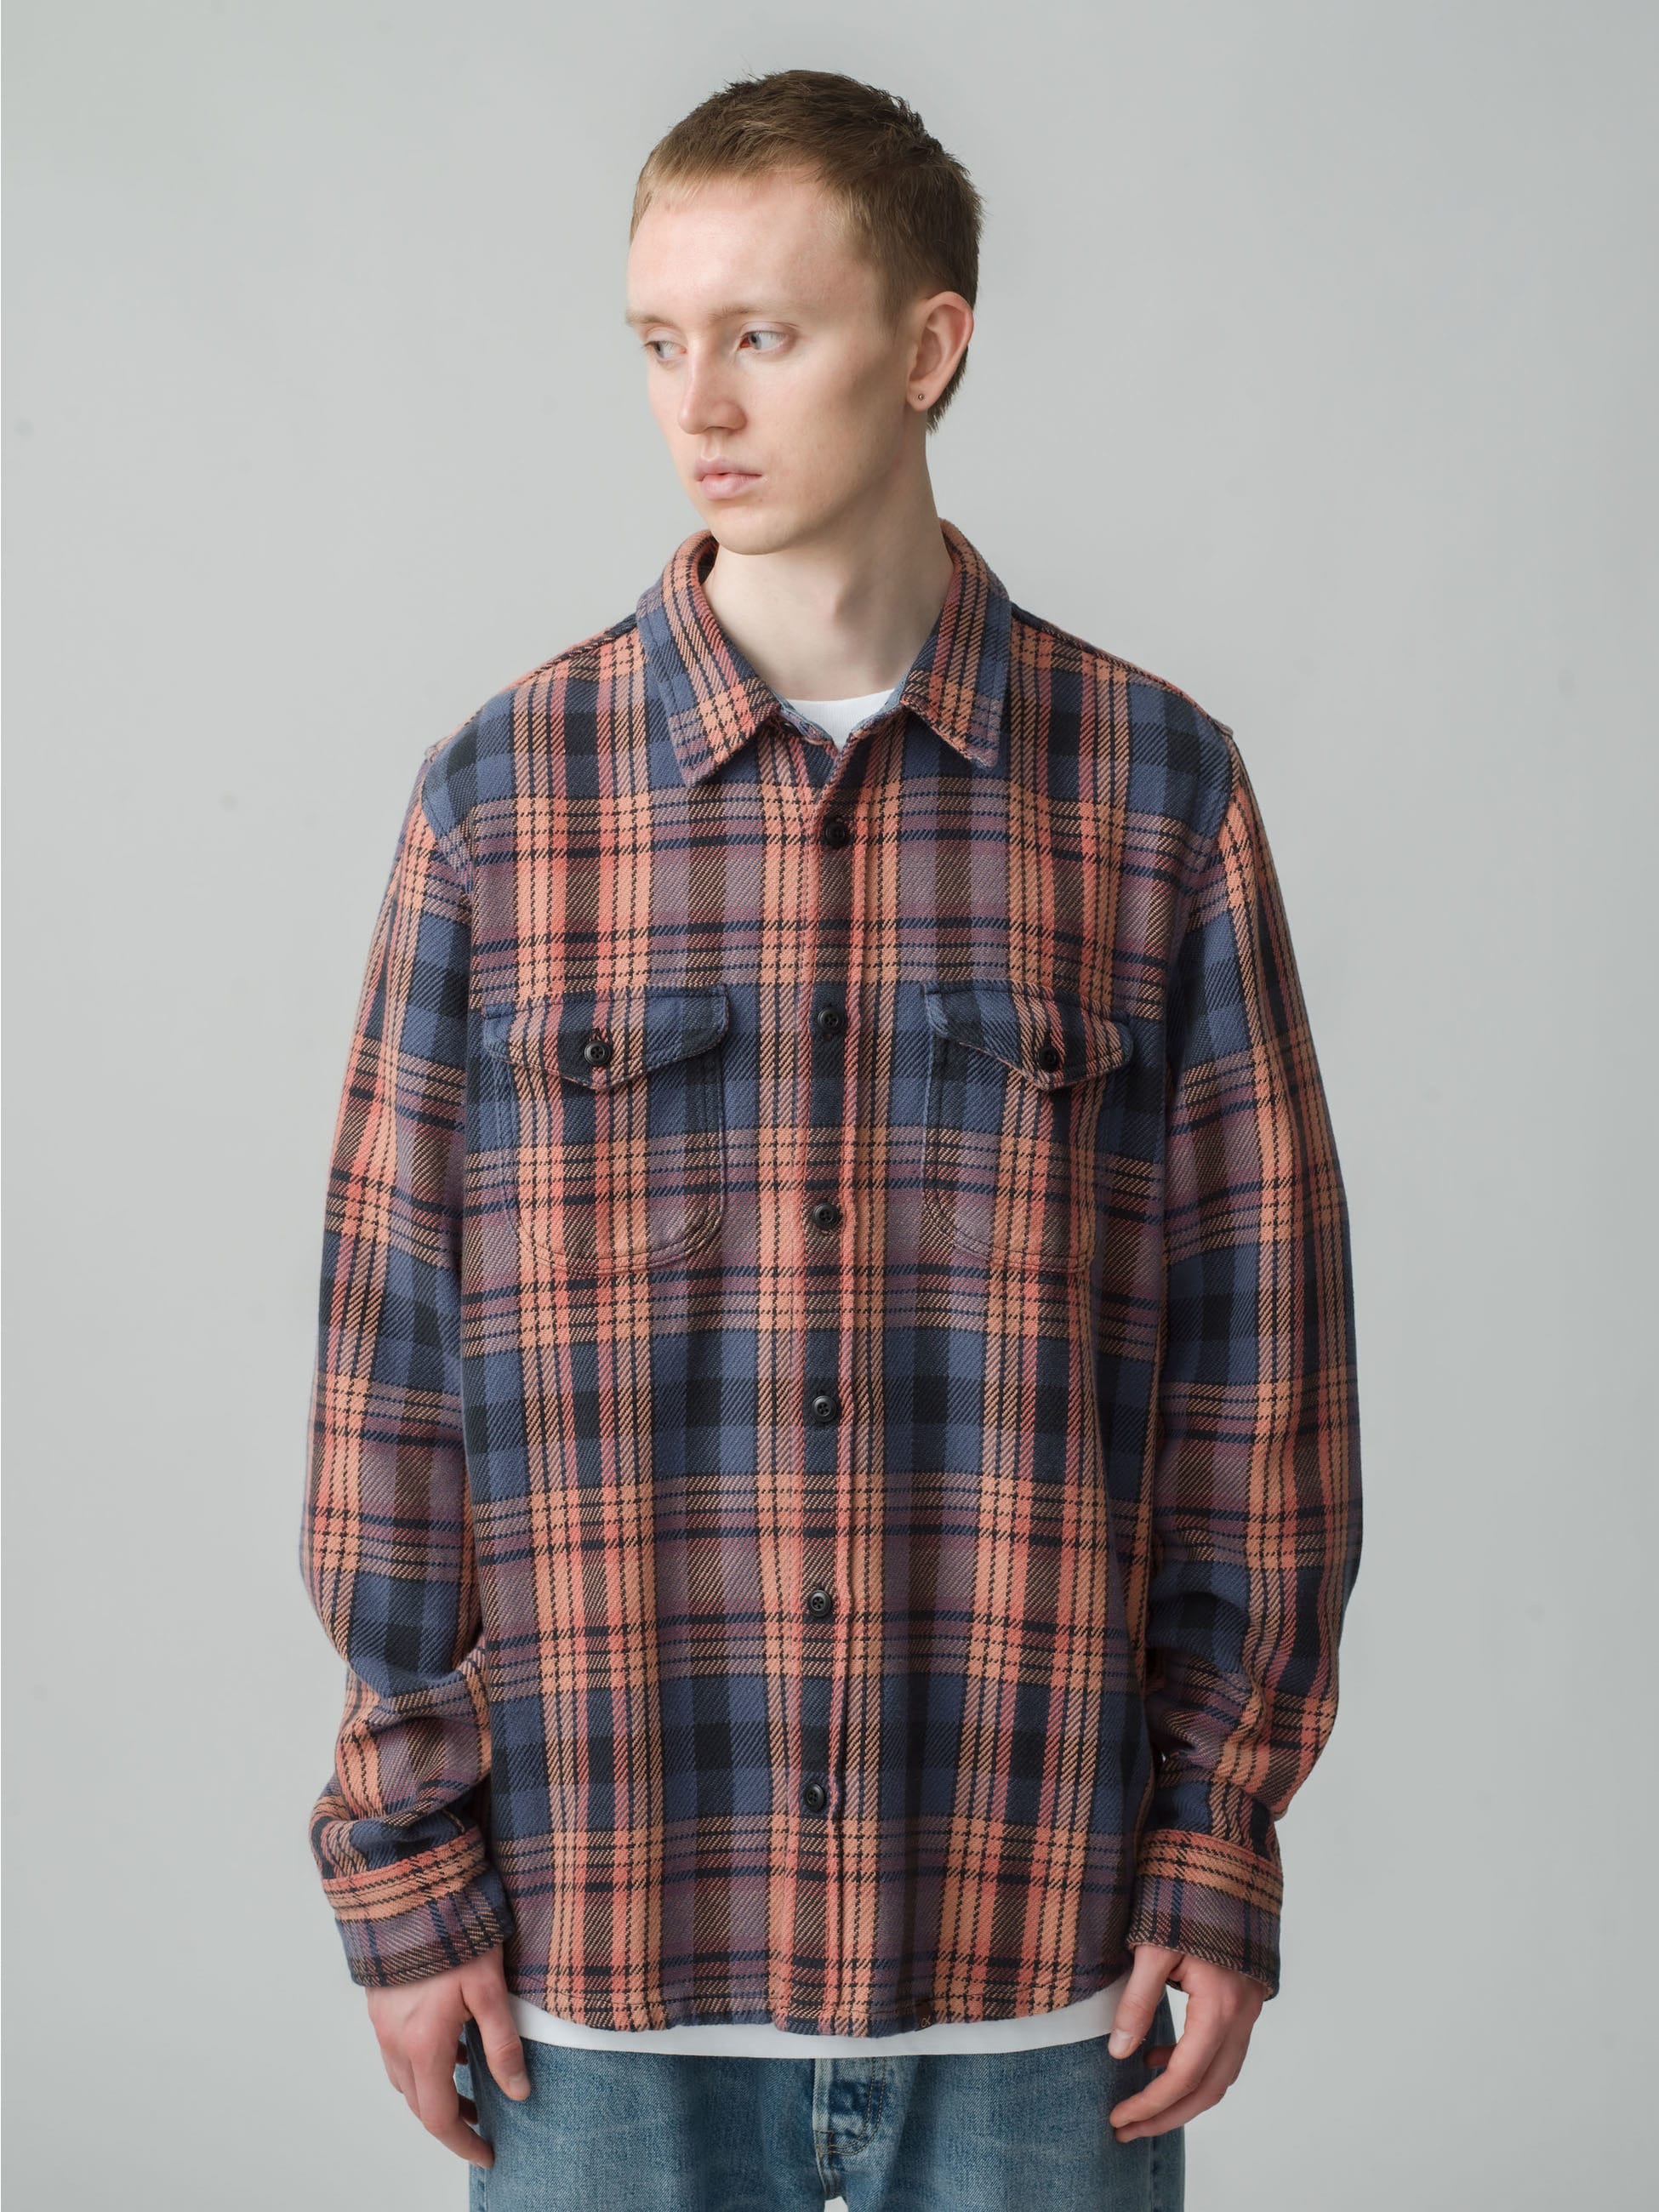 10 Years Washed Blanket Shirt｜OUTERKNOWN(アウターノウン)｜Ron Herman